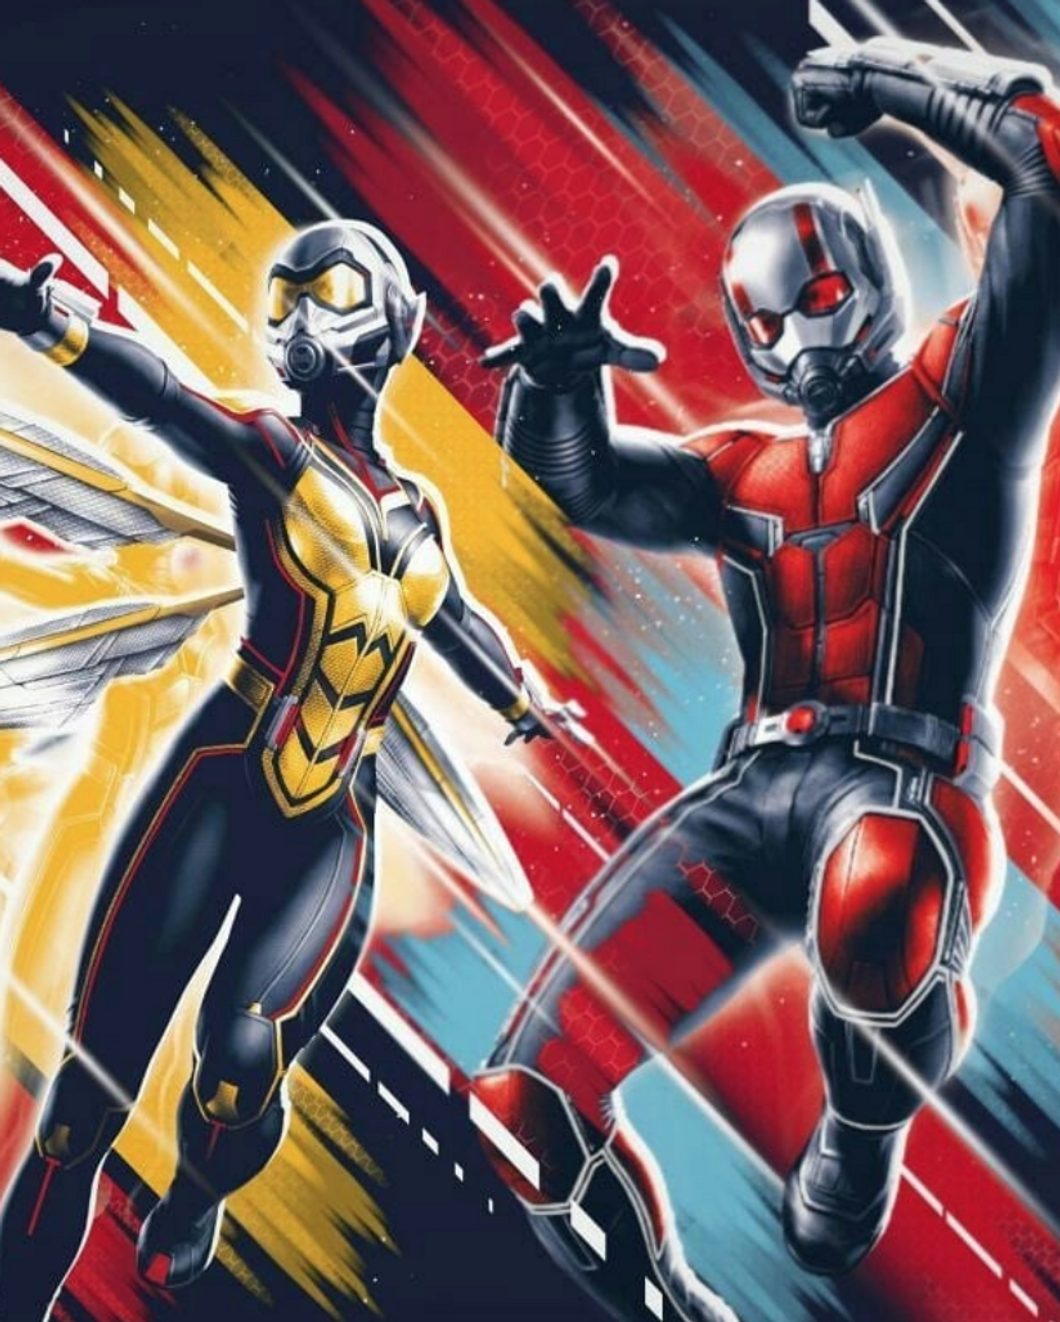 http://www.ign.com/articles/2018/06/12/exclusive-new-ant-man-and-the-wasp-poster